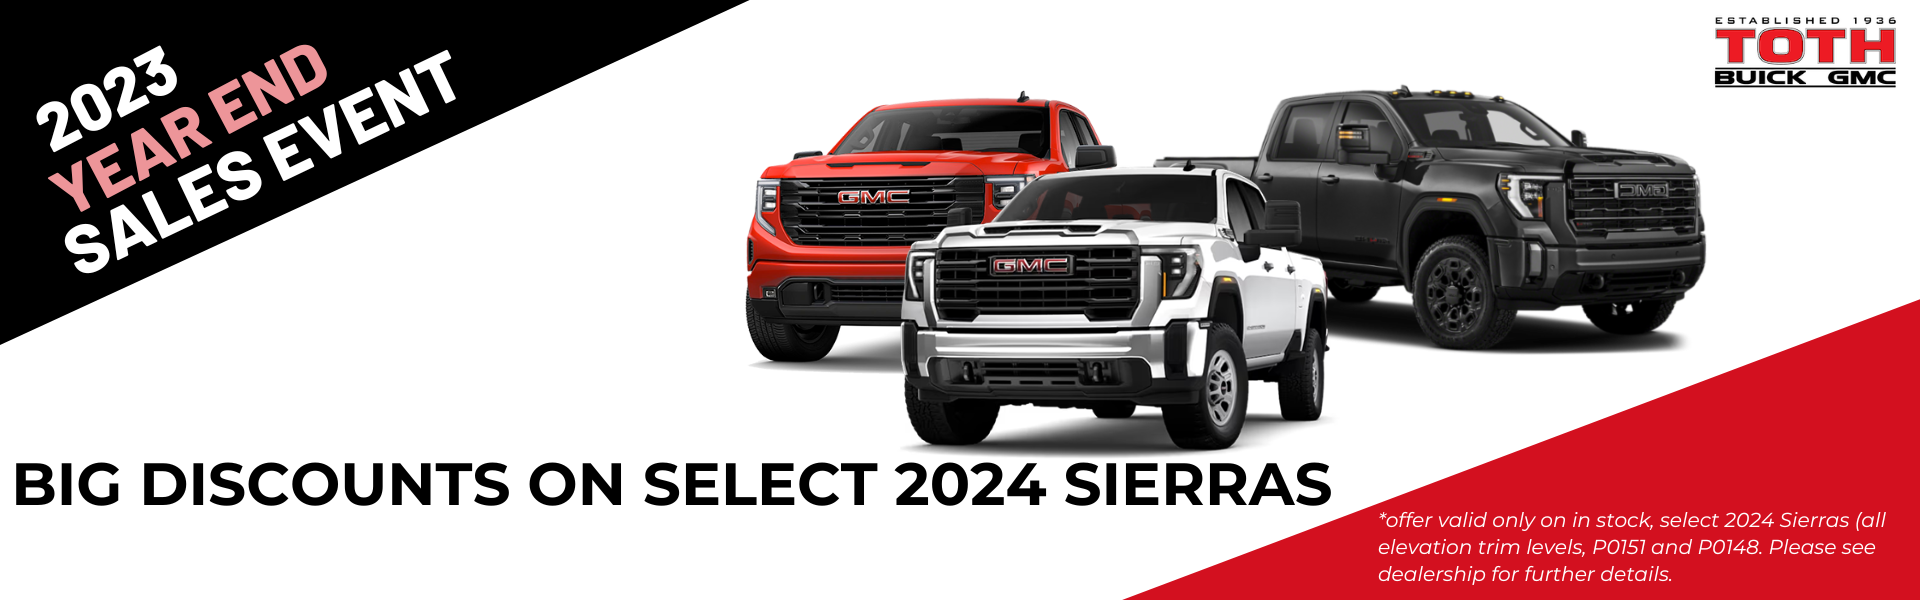 year end sales - big discounts on select 2024 sierras